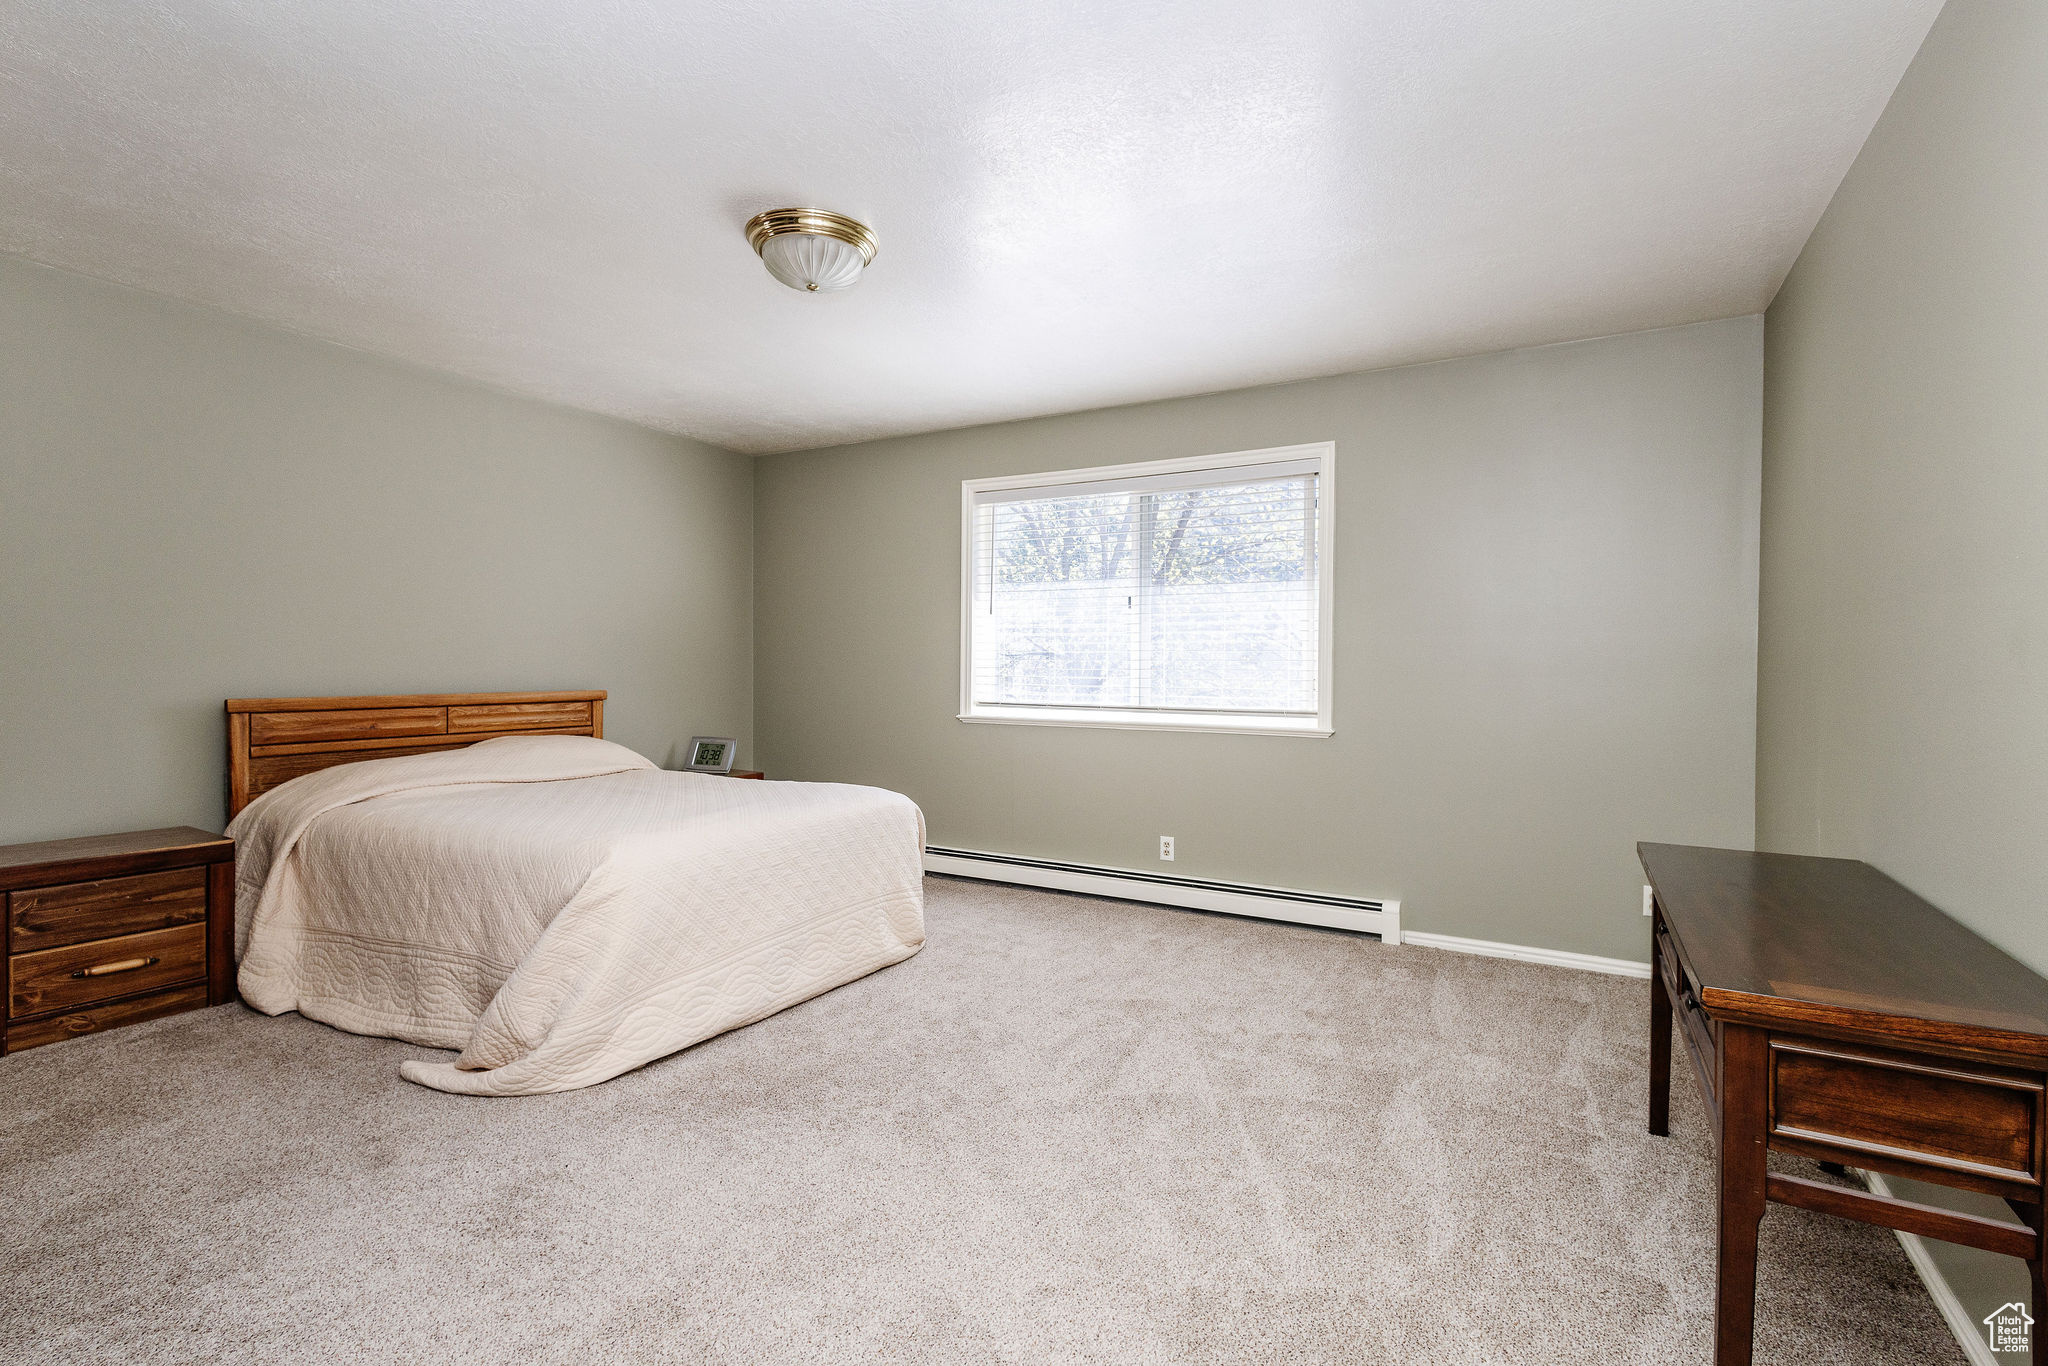 Bedroom featuring carpet flooring and a baseboard radiator